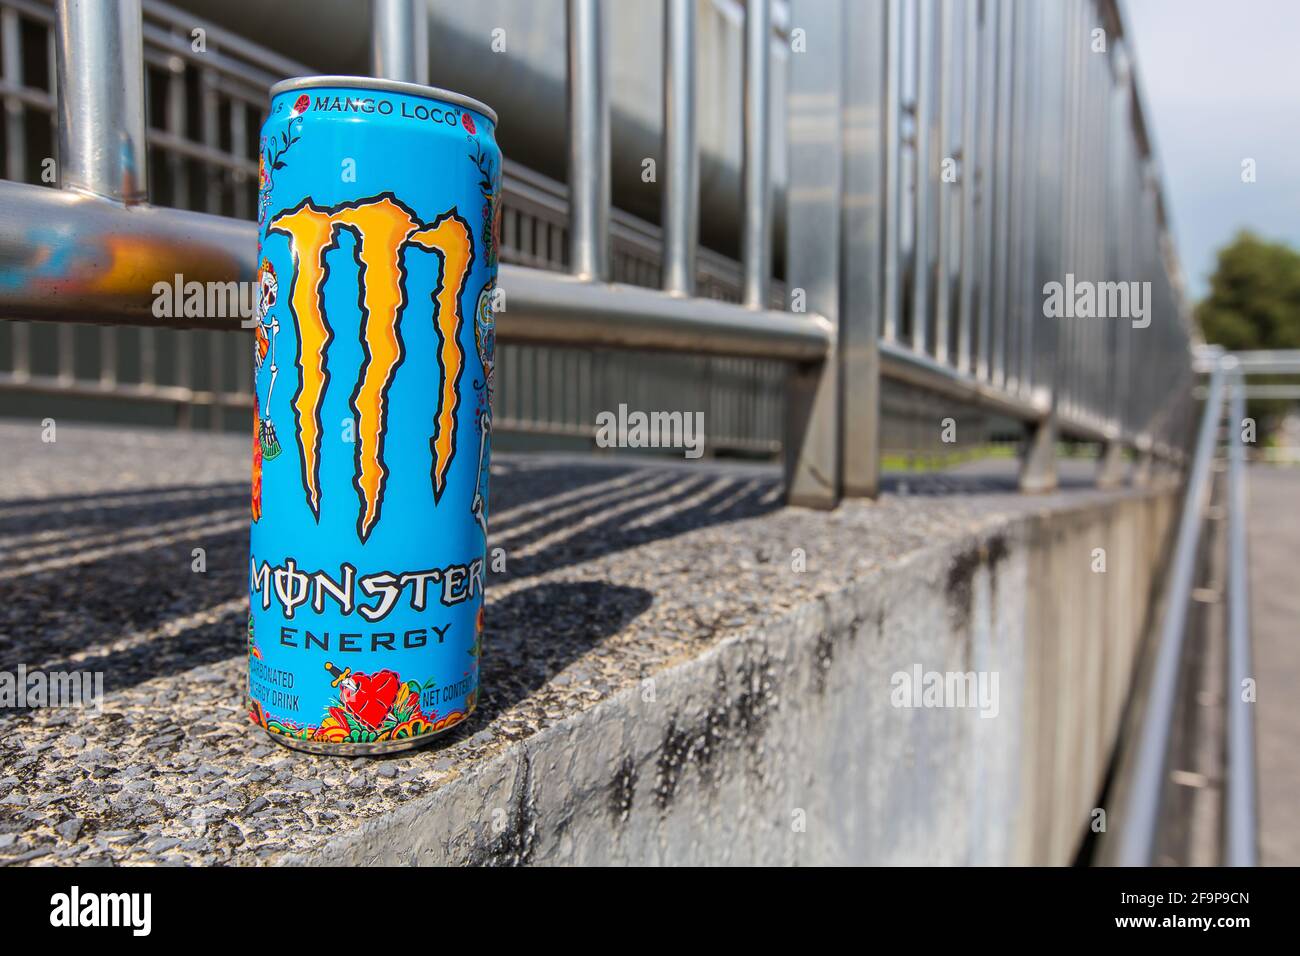 Mango Loco flavour Monster Energy drink, outdoor. Stock Photo